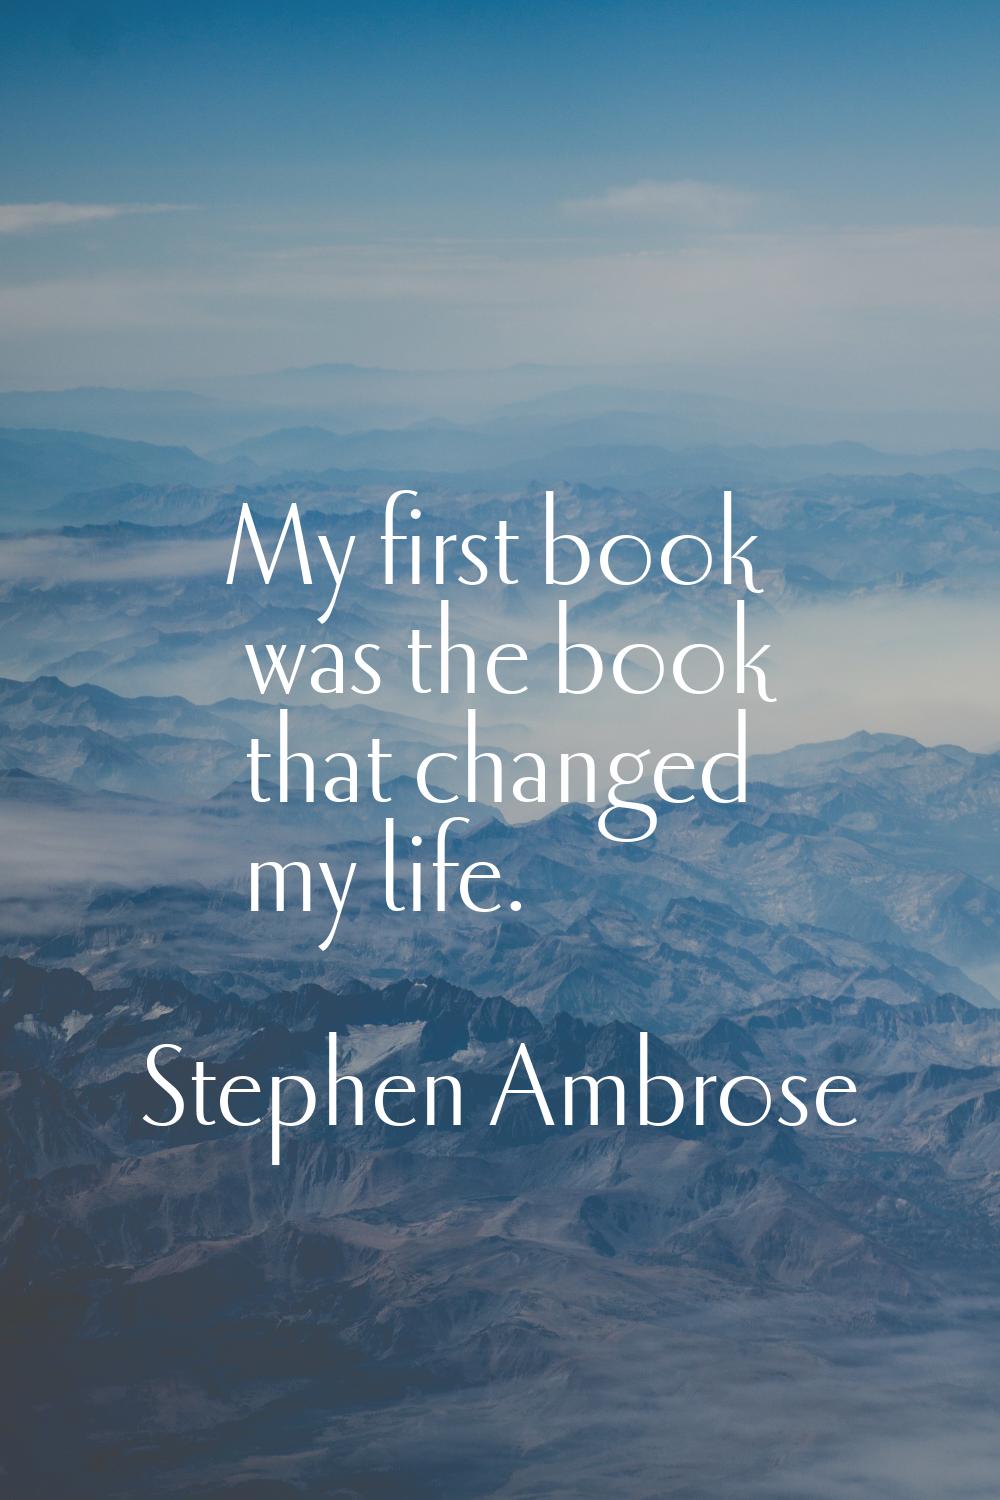 My first book was the book that changed my life.